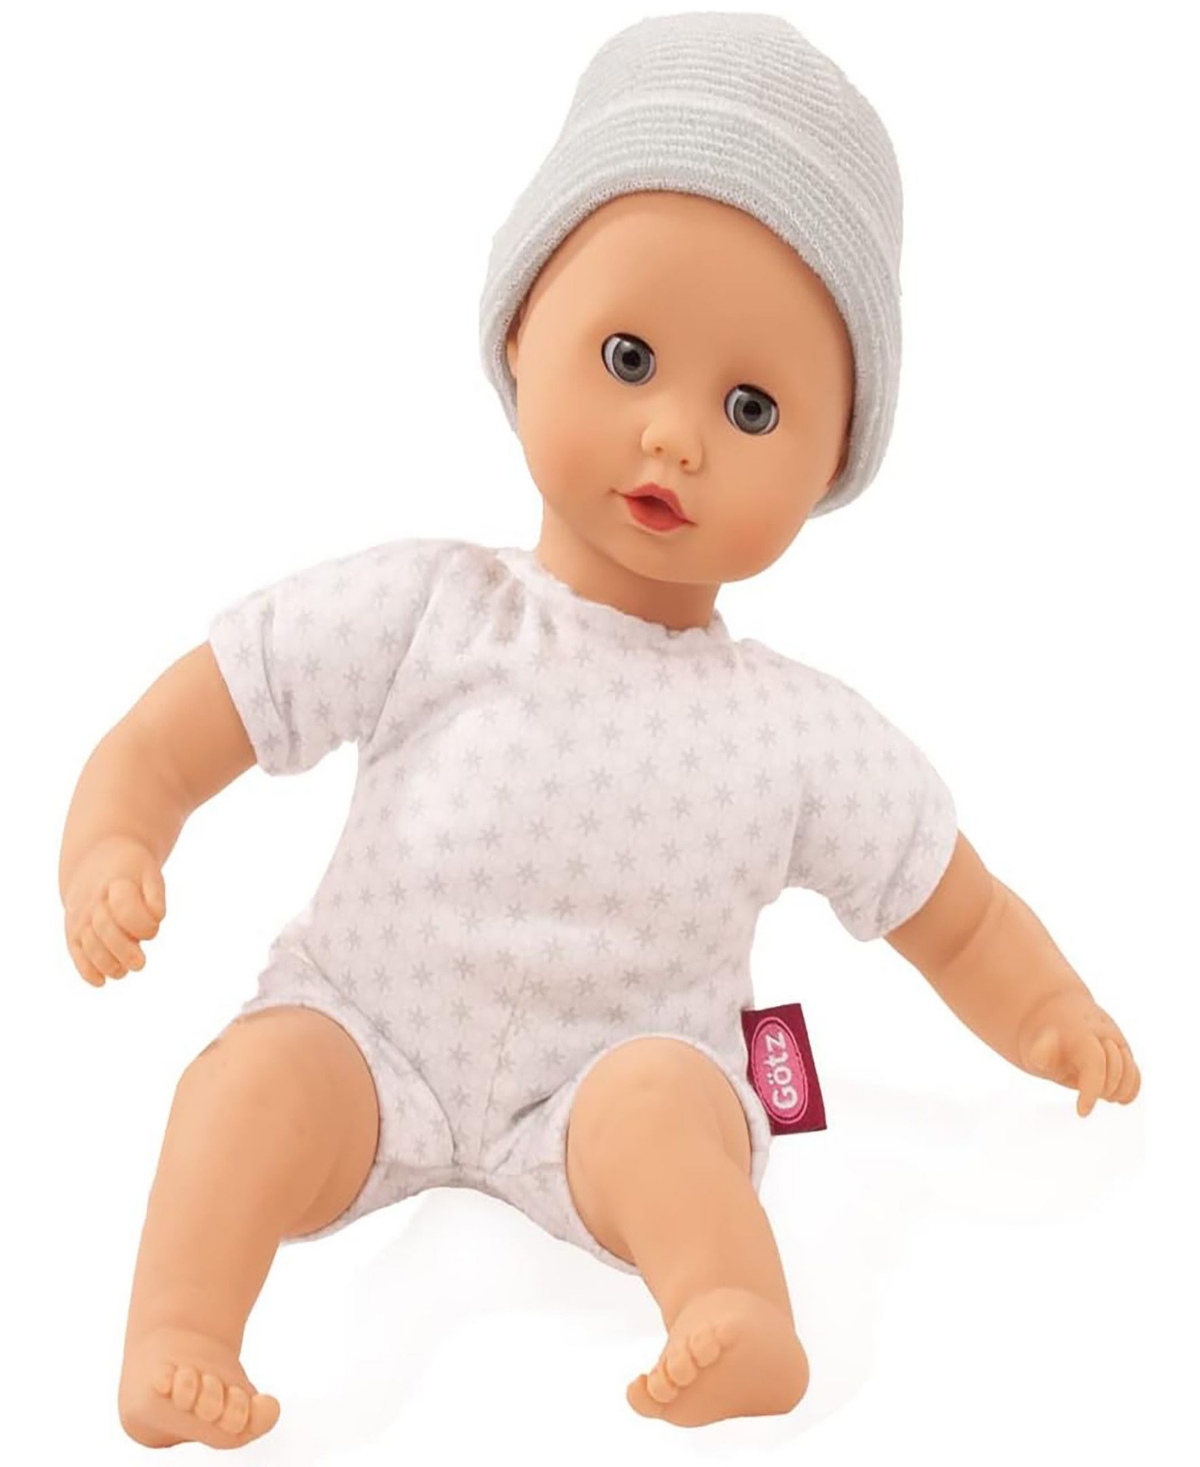 Götz Muffin To Dress Soft Body Baby Doll In Multi